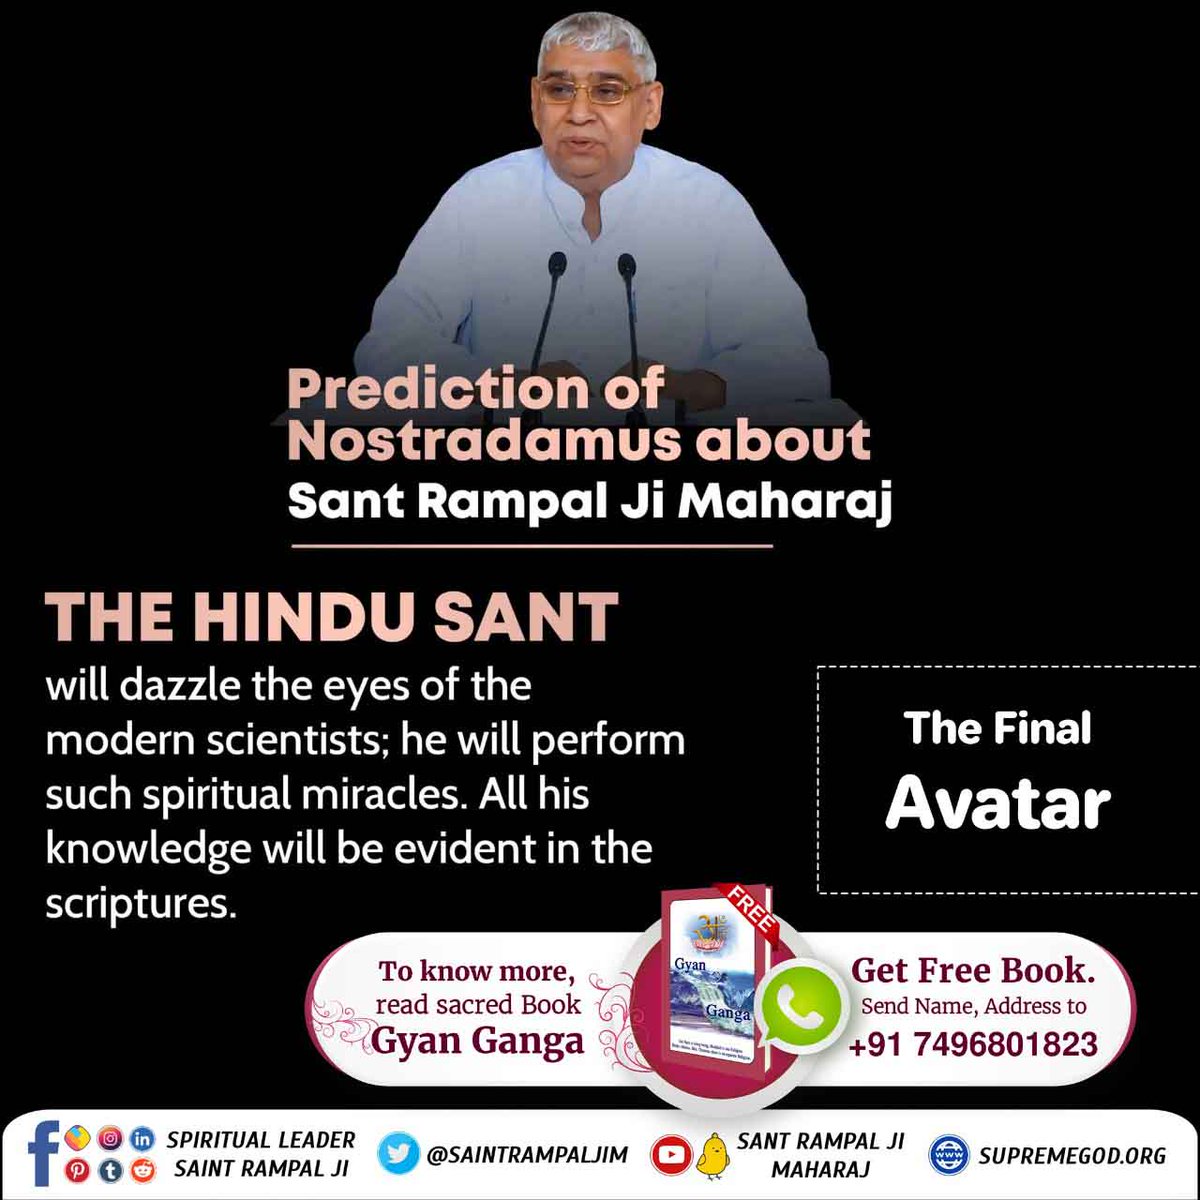 #आदि_सनातनधर्म_होगाप्रतिष्ठित Prediction of Nostradamus about Sant Rampal Ji Maharaj ⤵️⤵️ THE HINDU SANT will dazzle the eyes of the modern scientists; he will perform such spiritual miracles. All his knowledge will be evident in the scriptures.